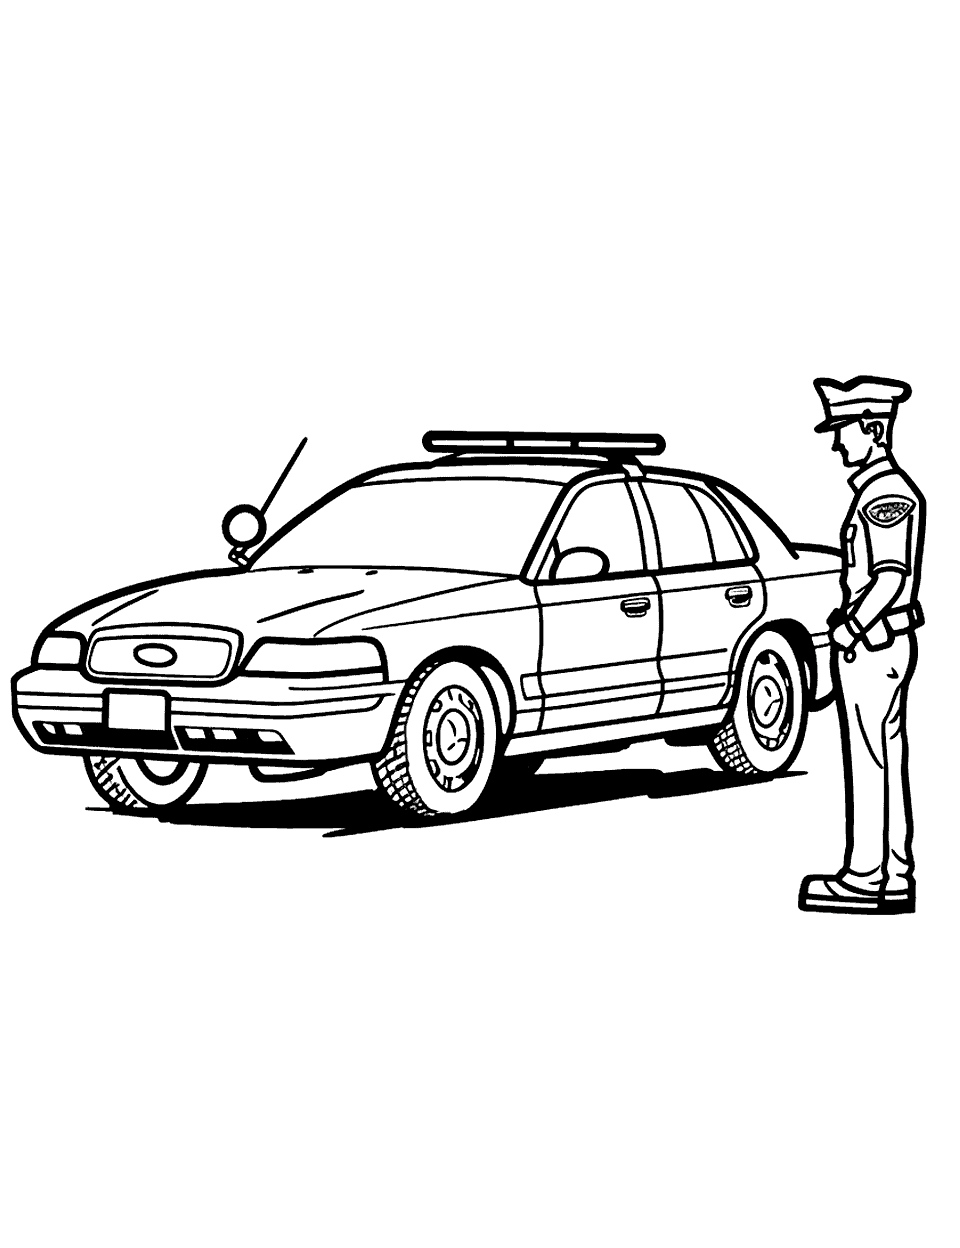 Car Inspection Police Coloring Page - A police car parked as an officer inspecting it before taking it out for duty.